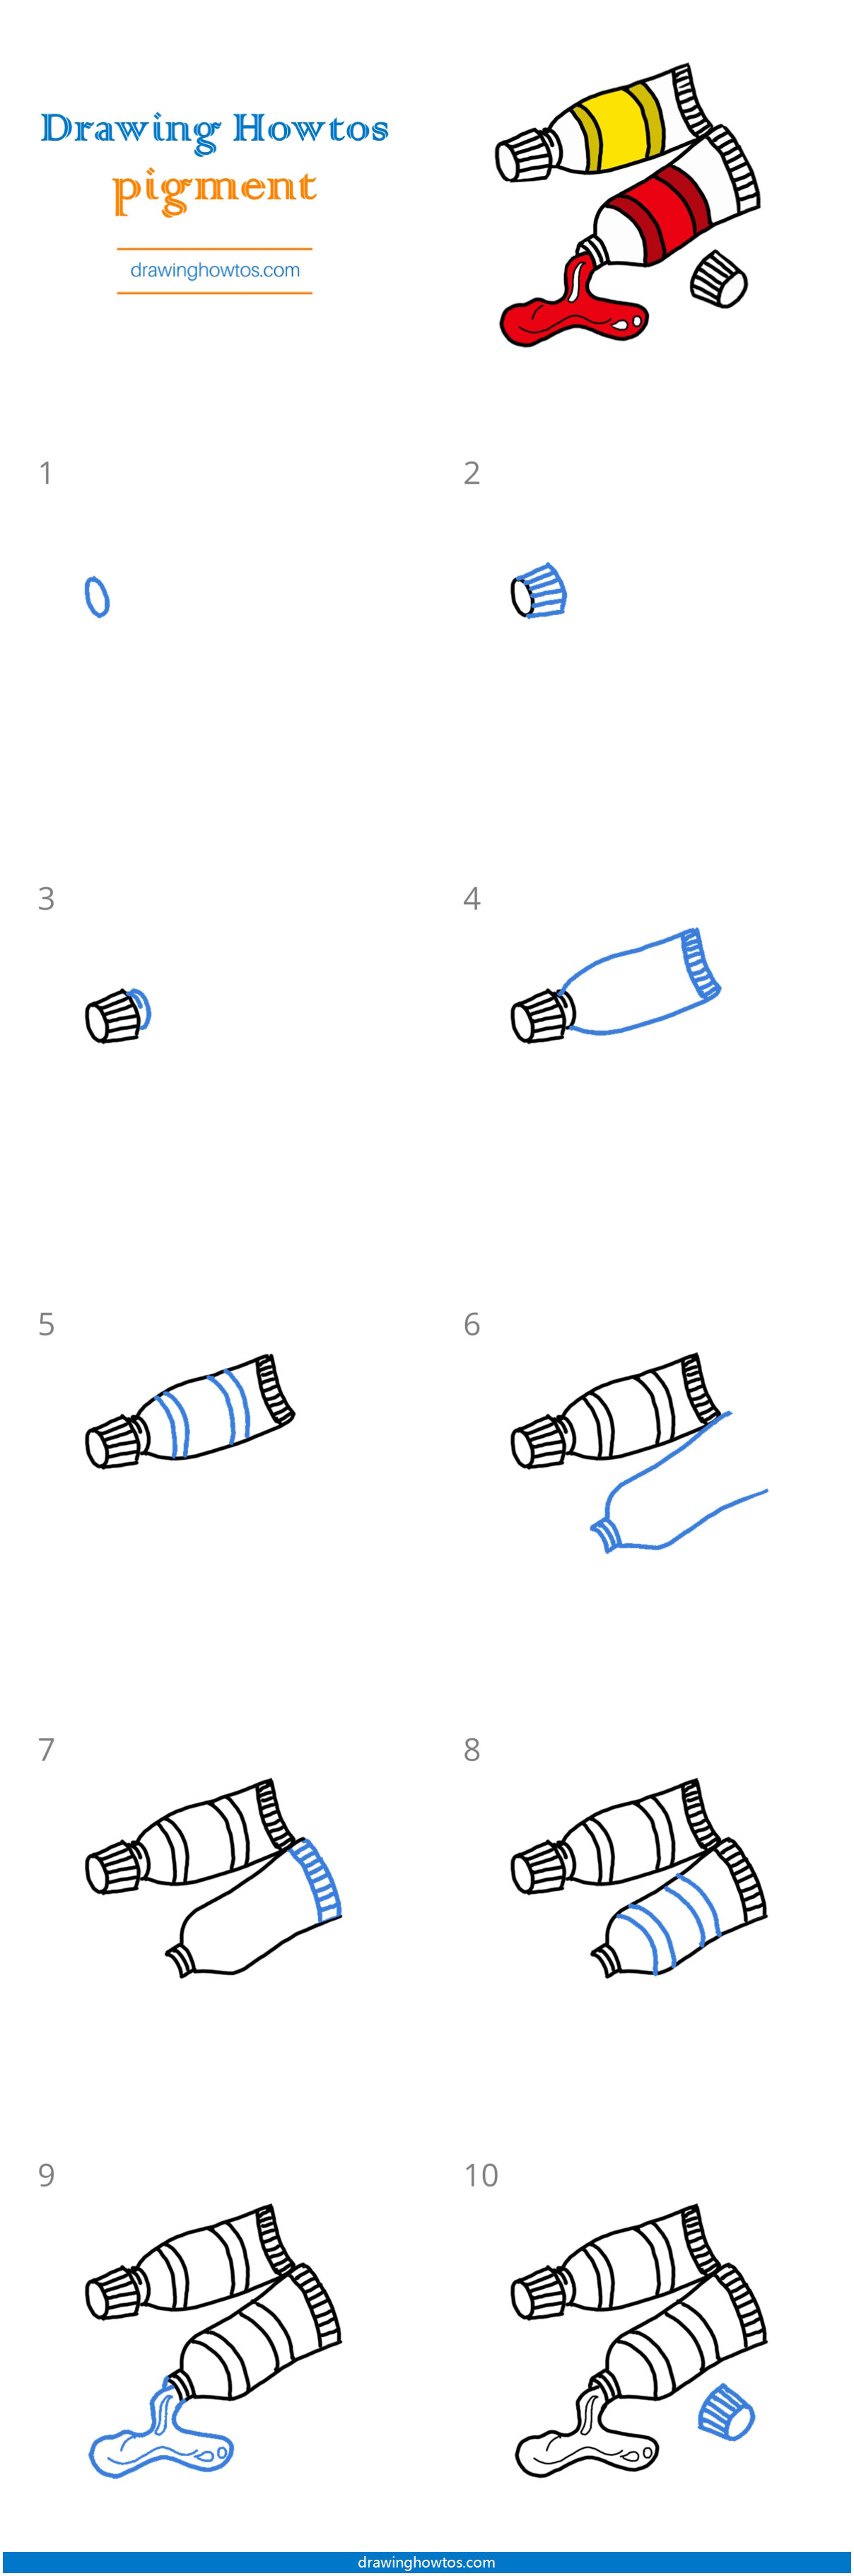 How to Draw Paint Tubes Step by Step